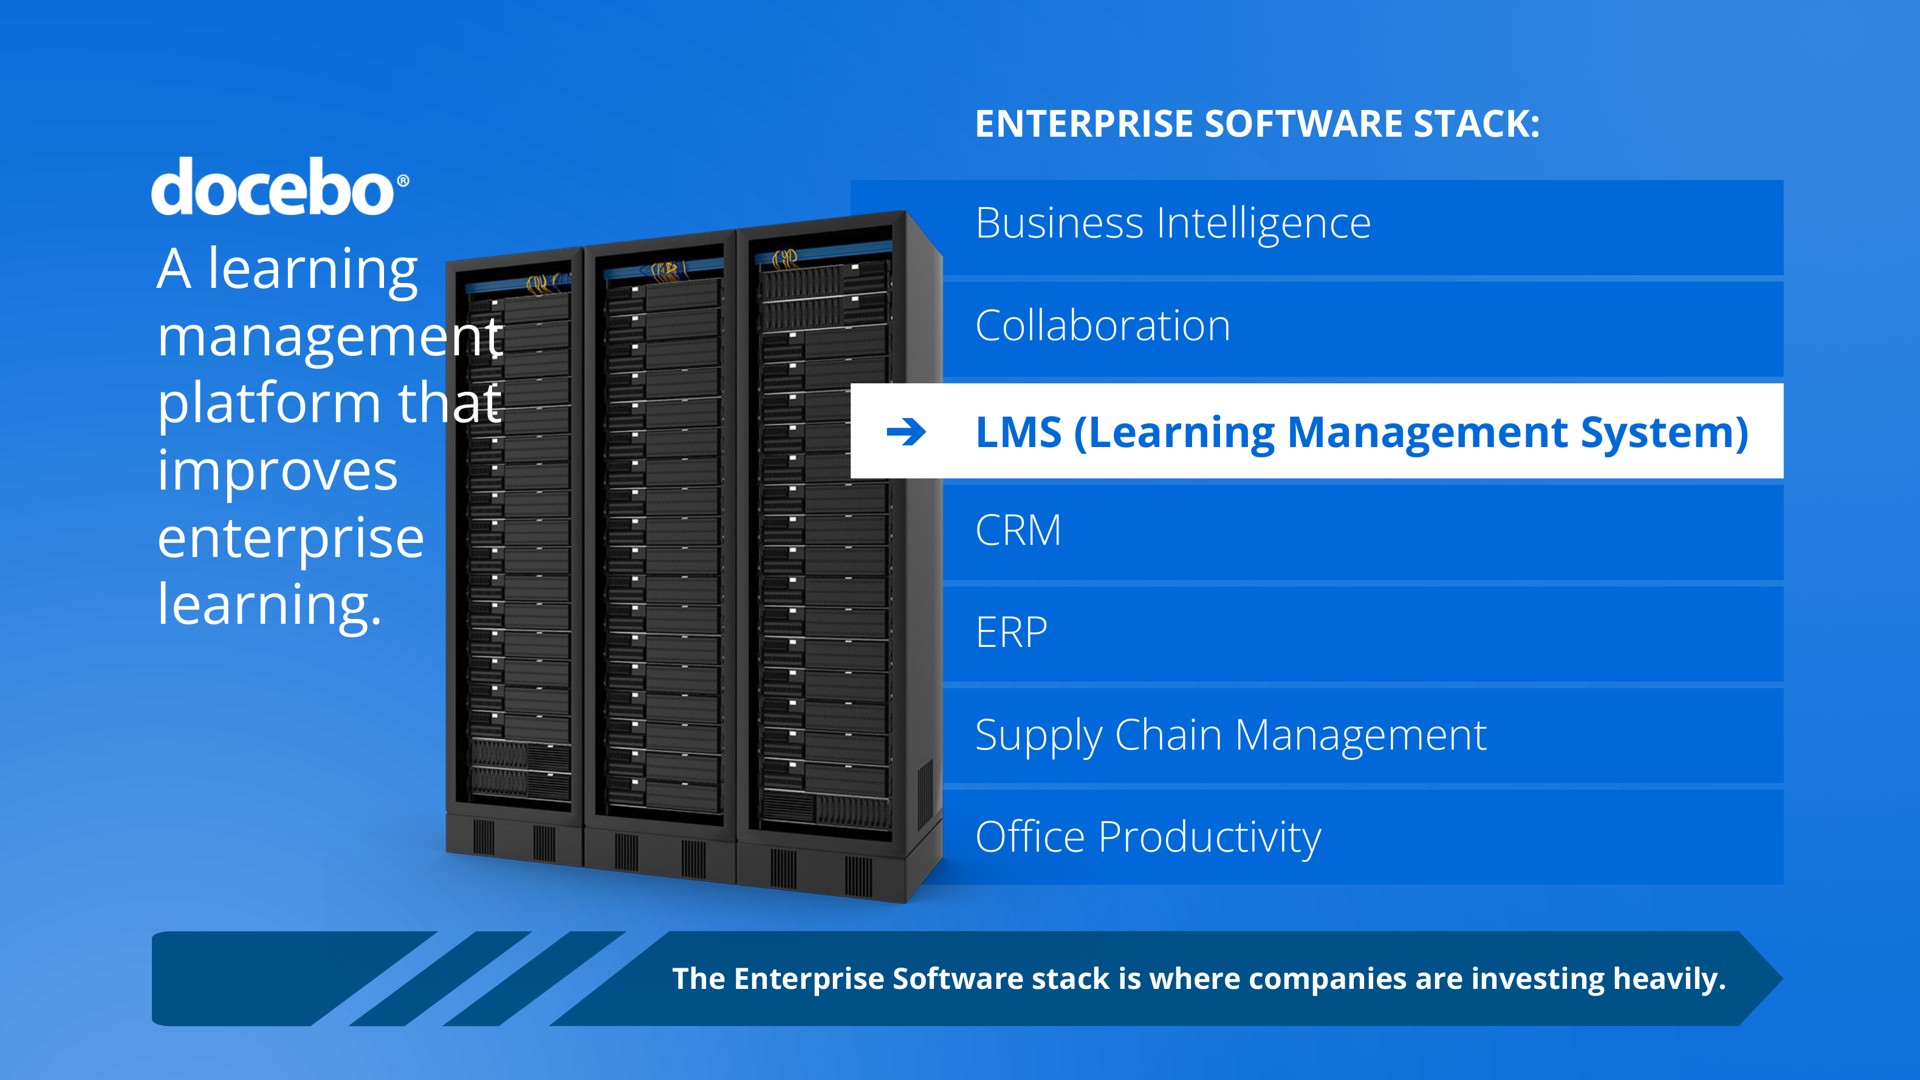 a learning management platform that improves enterprise learning enterprise stack business intelligence collaboration learning management system supply chain management productivity to yen a me mae office | Docebo